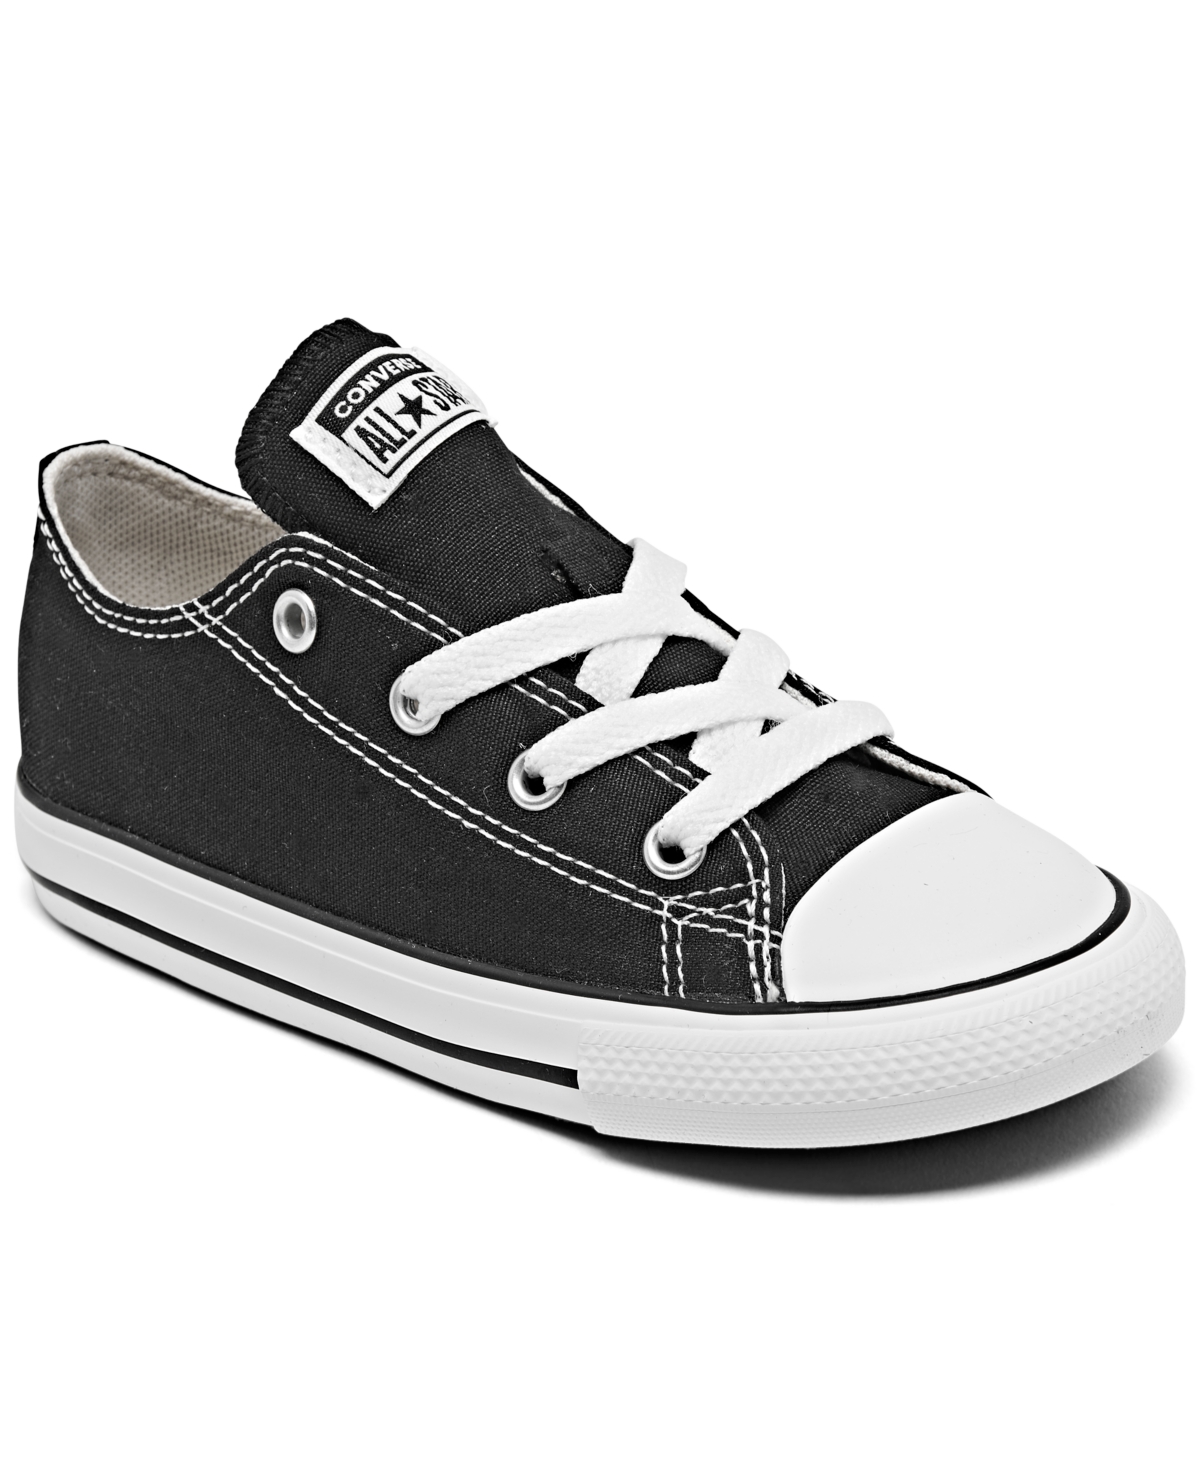 UPC 022866406062 product image for Toddler Chuck Taylor Original Sneakers from Finish Line | upcitemdb.com